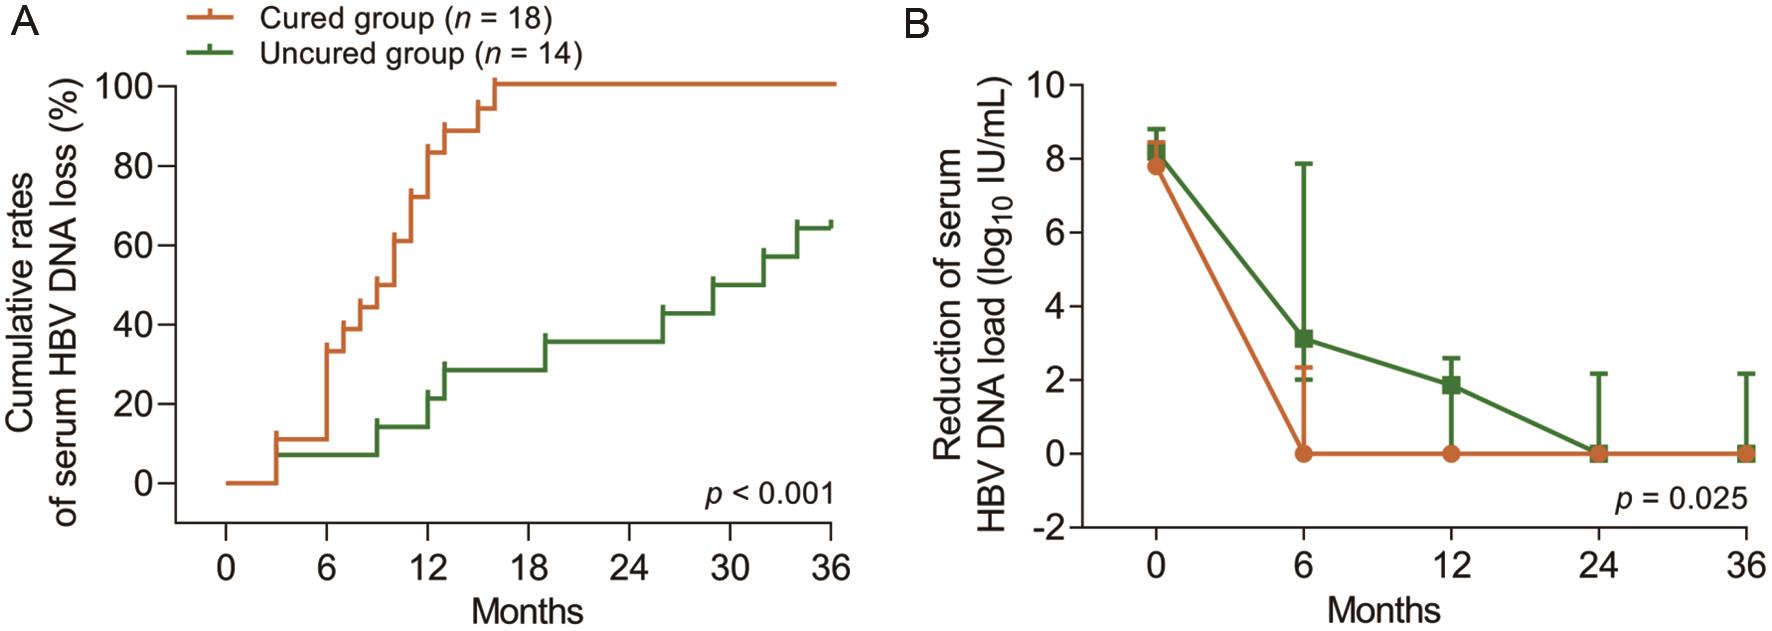 Cumulative rate of HBV DNA loss and reduction of viral load in cured and uncured children during antiviral therapy.